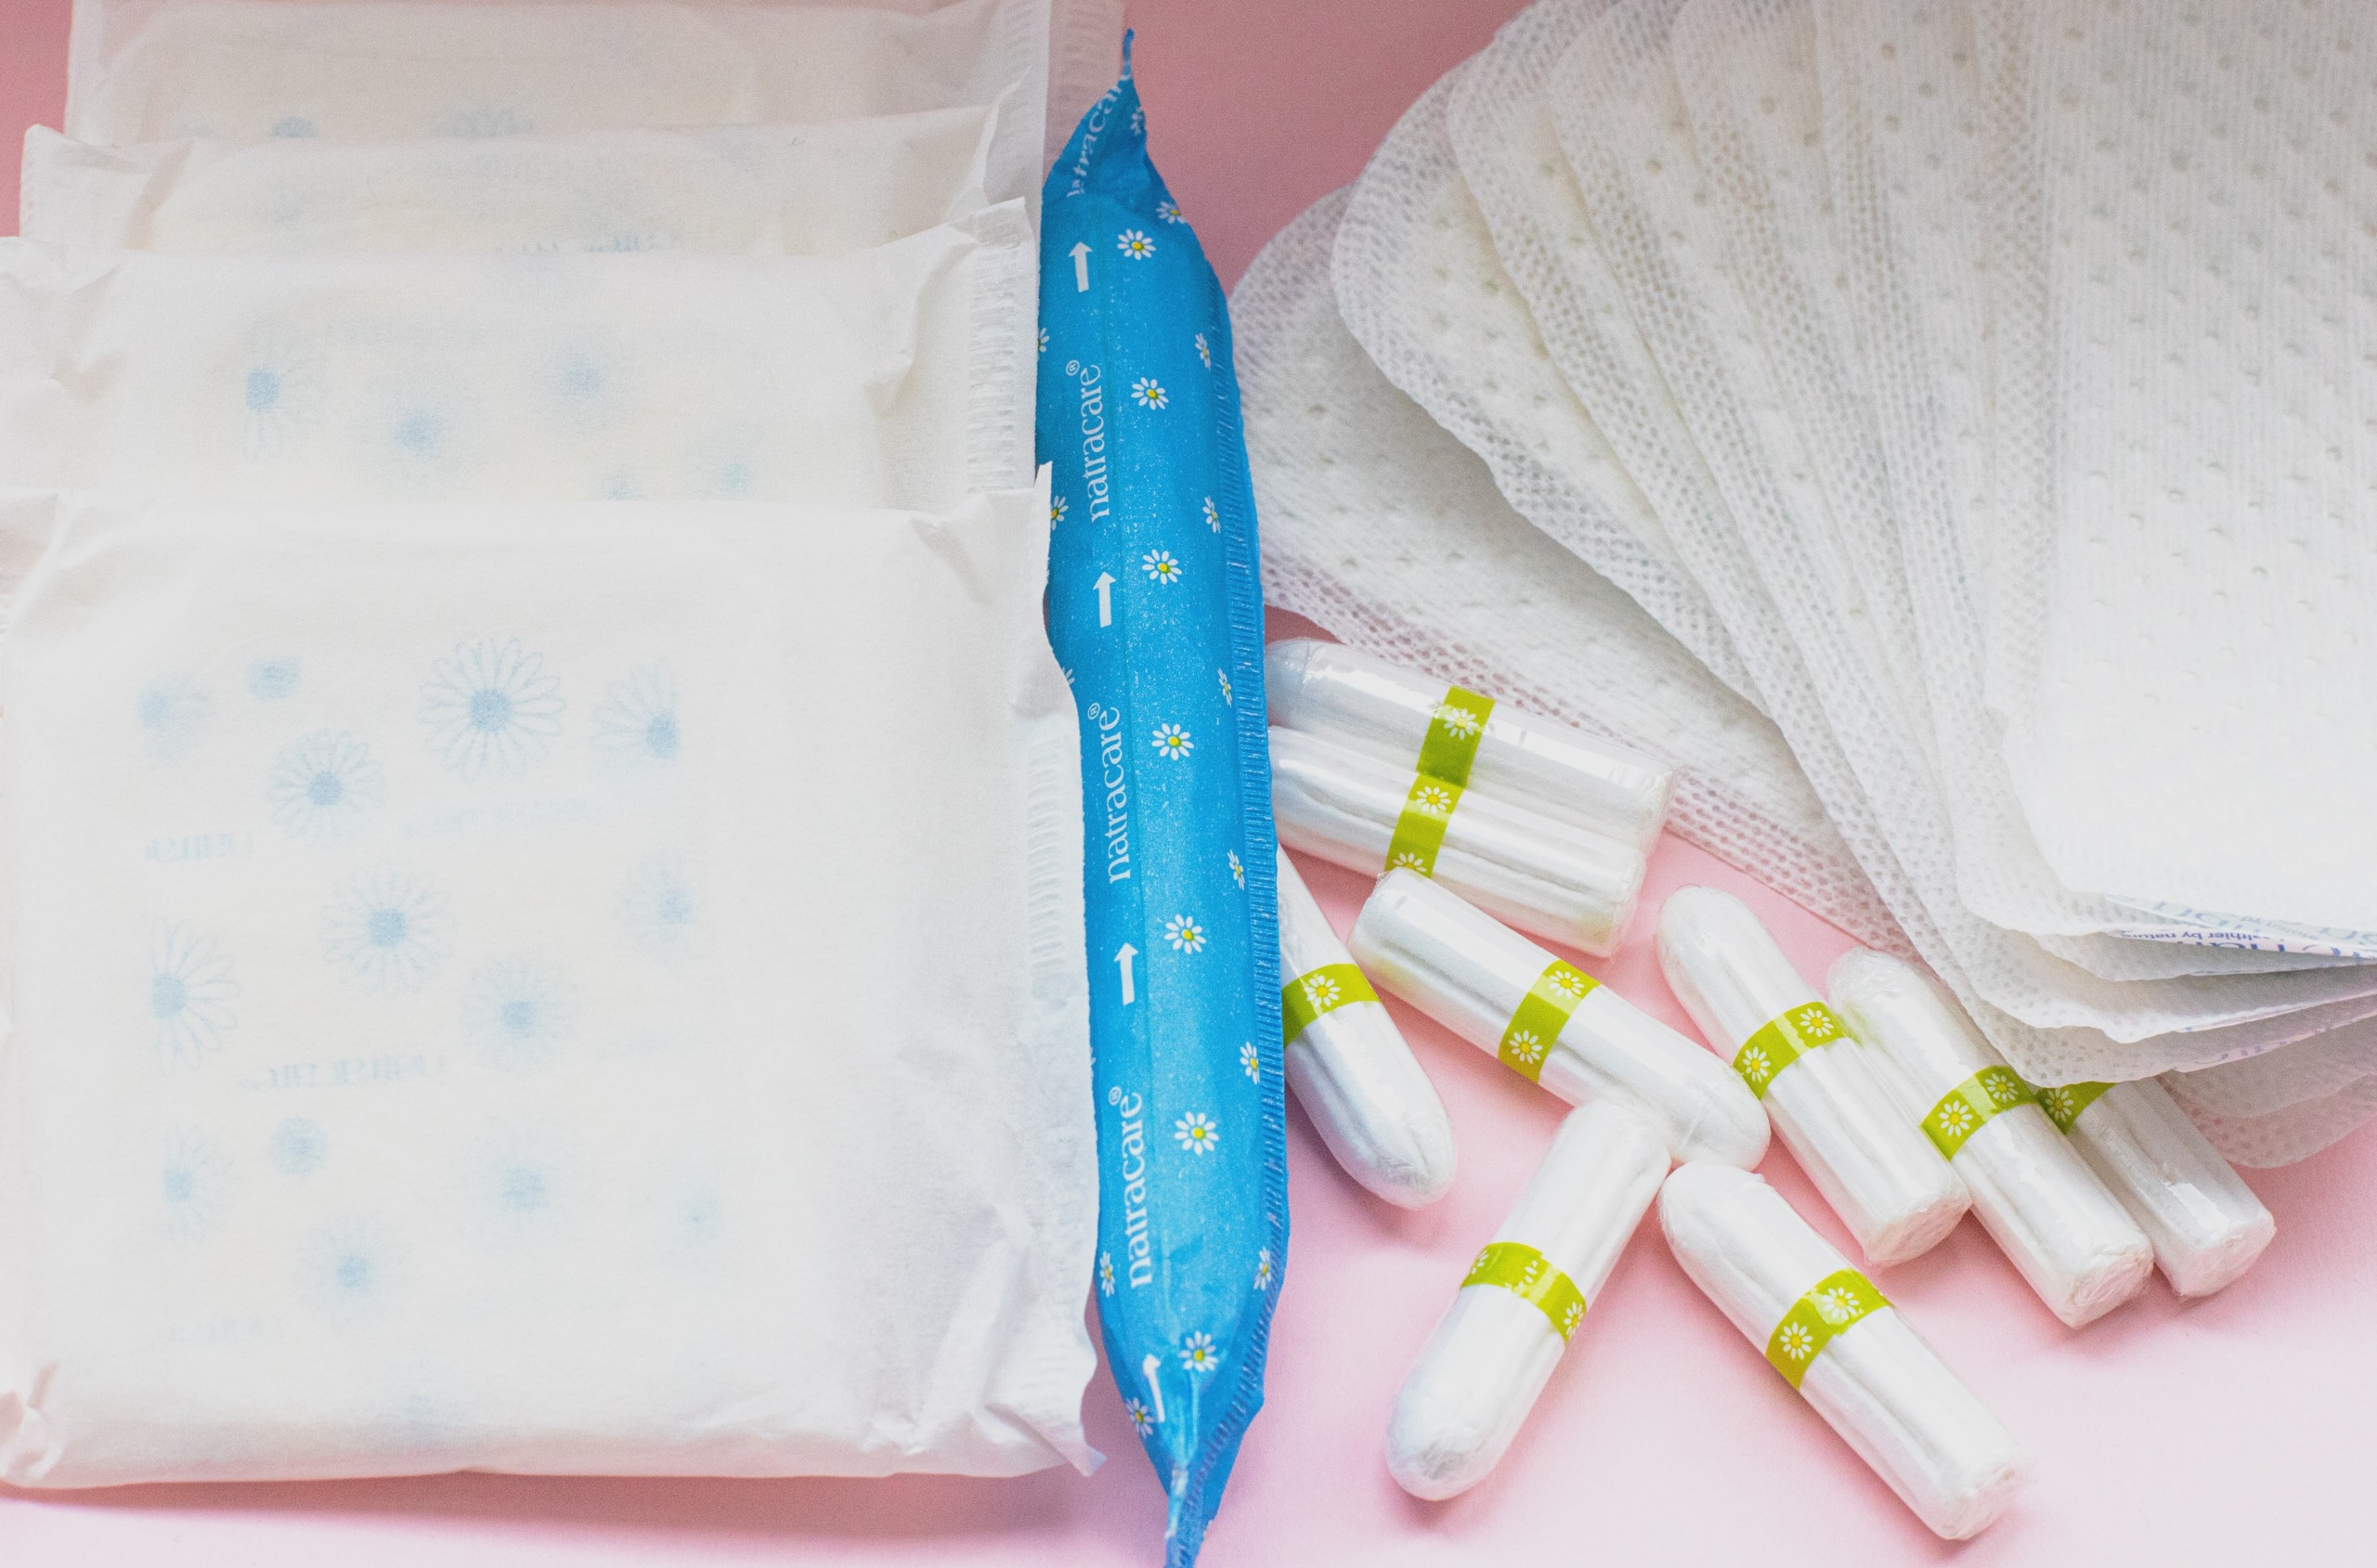 Local organizations calling on Ontario to provide more funding for menstrual hygiene products in schools